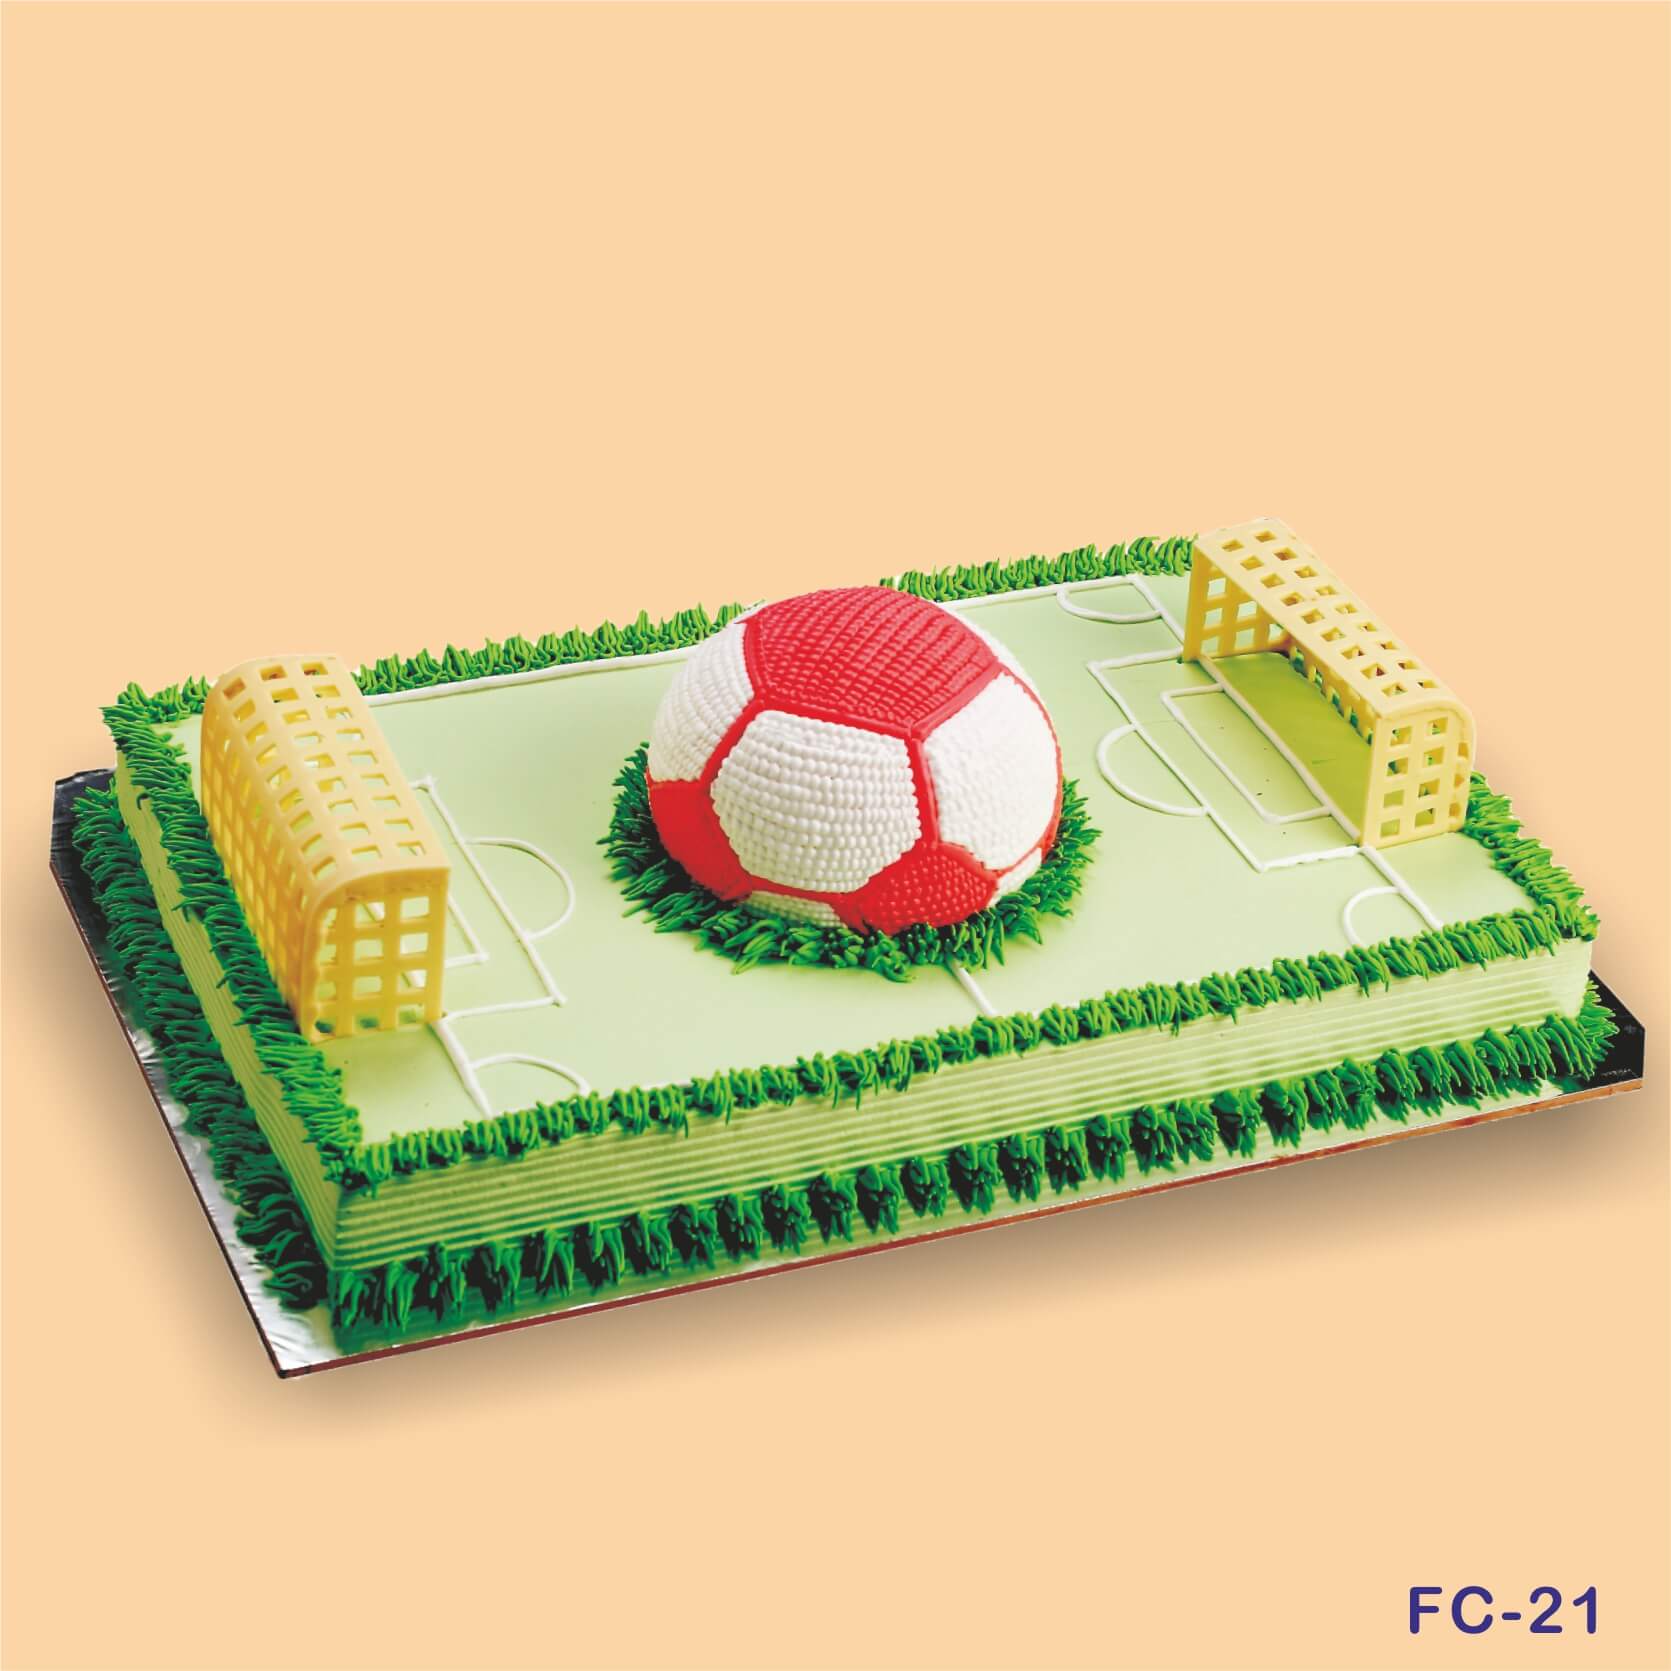 Online Football Cake Delivery | GoGift